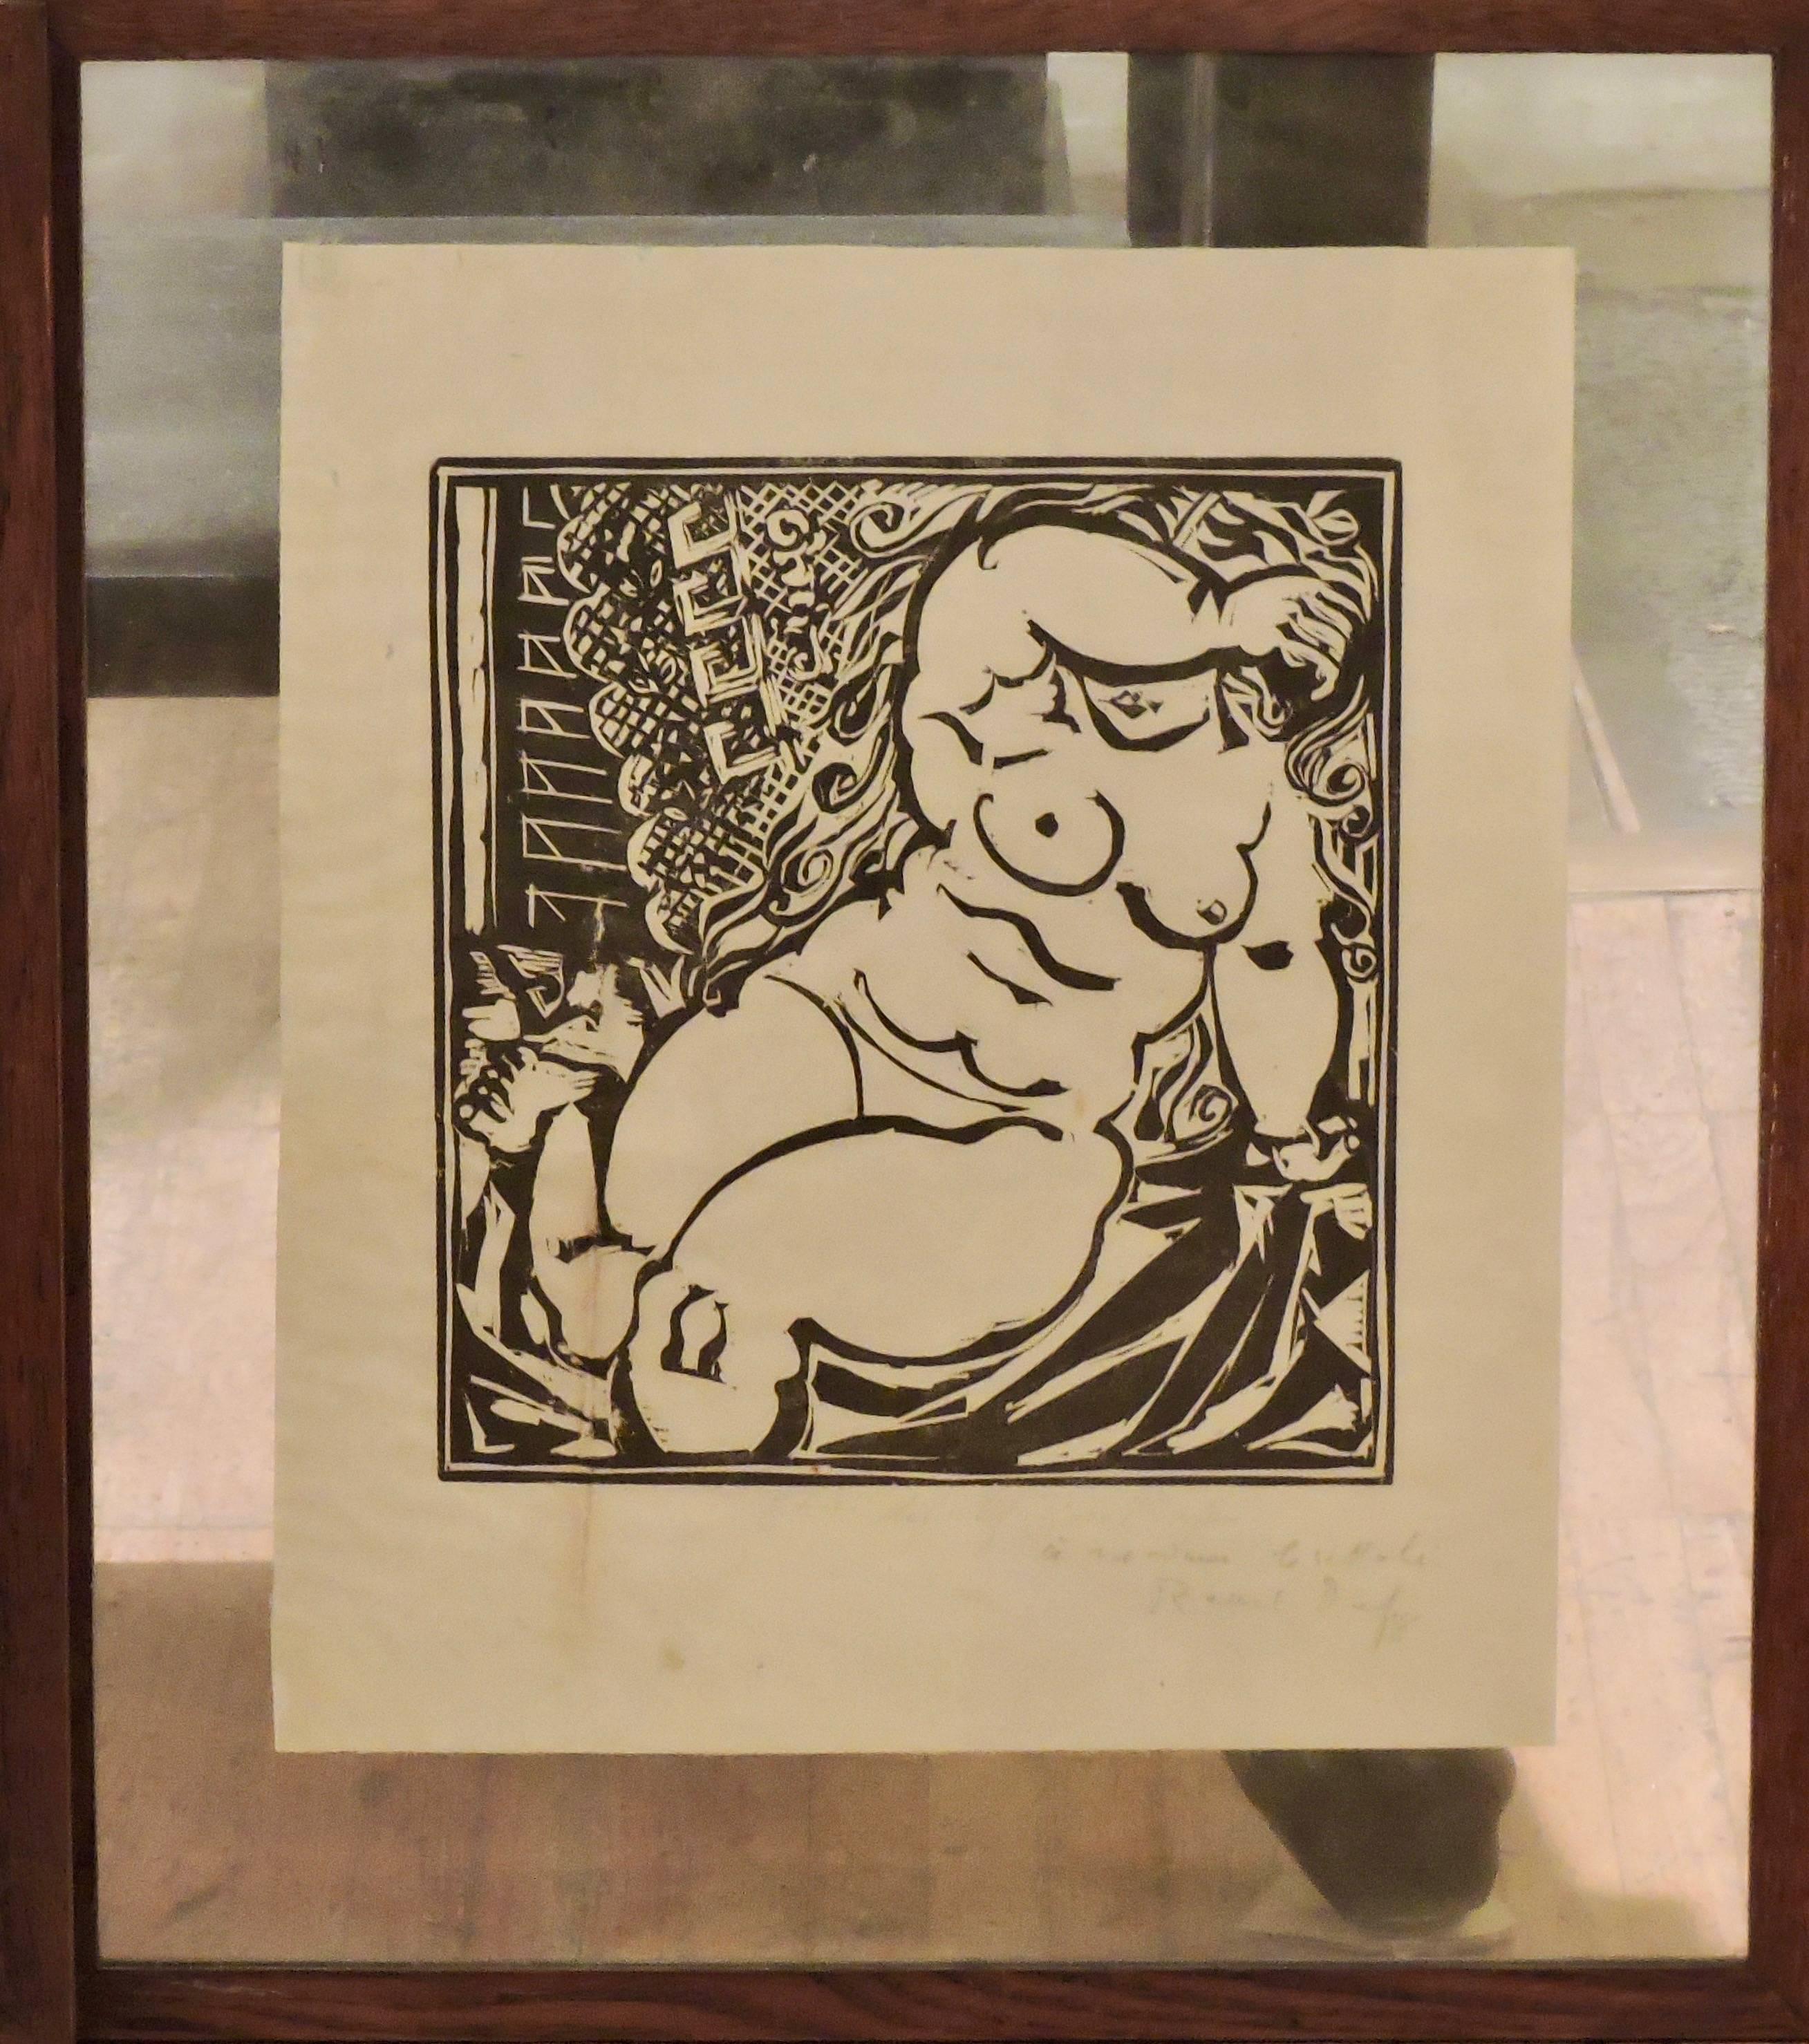 A pair of Raoul Dufy print-multiple woodcut, Chine Volant paper
Both hand signed by Raoul Dufy and dedicated
Framed in glass and mahogany
Measures: Total height 42 cm wide 36 depth 1 cm
Print height 30 cm wide 26 cm.